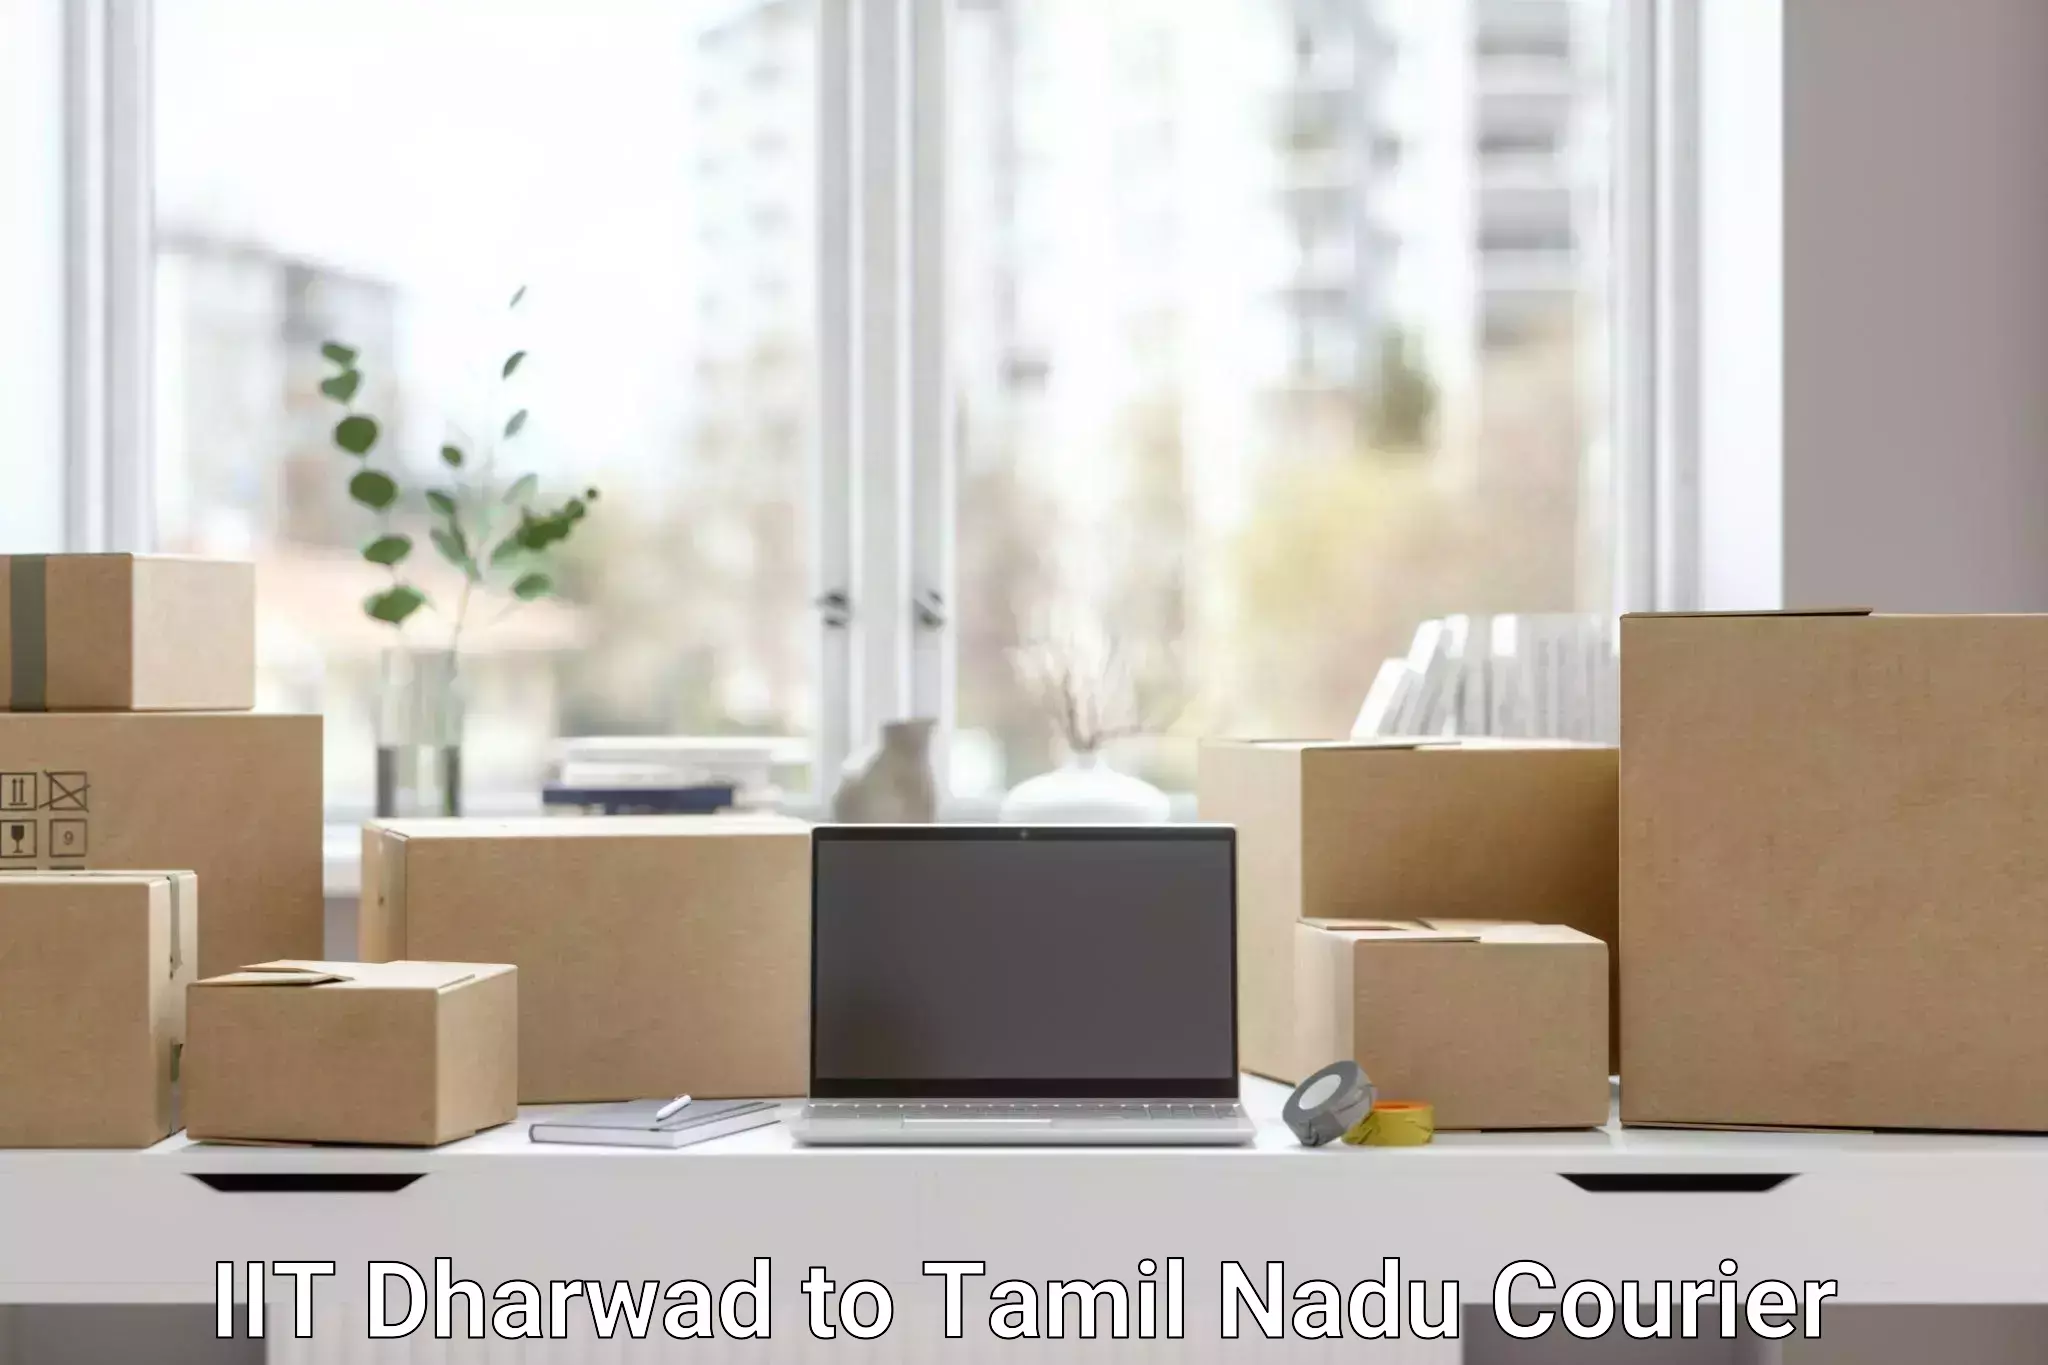 User-friendly delivery service IIT Dharwad to Tamil Nadu